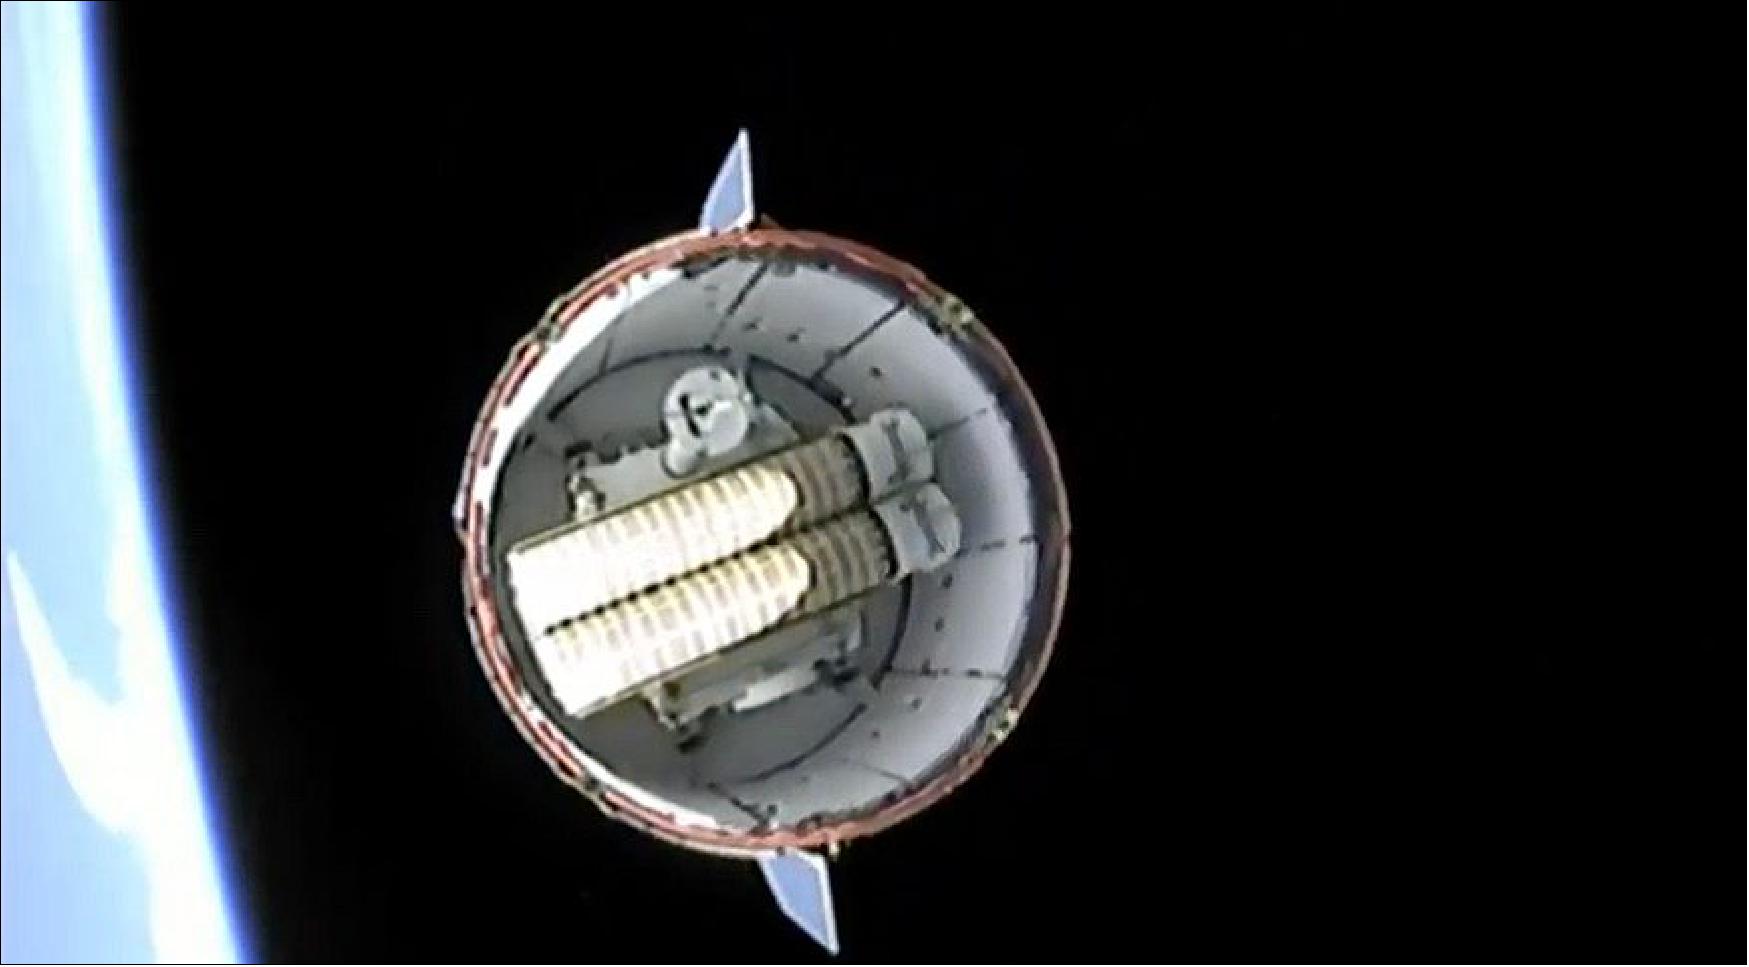 Figure 2: A SpaceX cargo Dragon spacecraft after separation from the upper stage of its Falcon 9 rocket June 3. Visible in the trunk section of the Dragon are two solar arrays, in their rolled-up configuration, that will be installed on the space station (image credit: NASA TV)